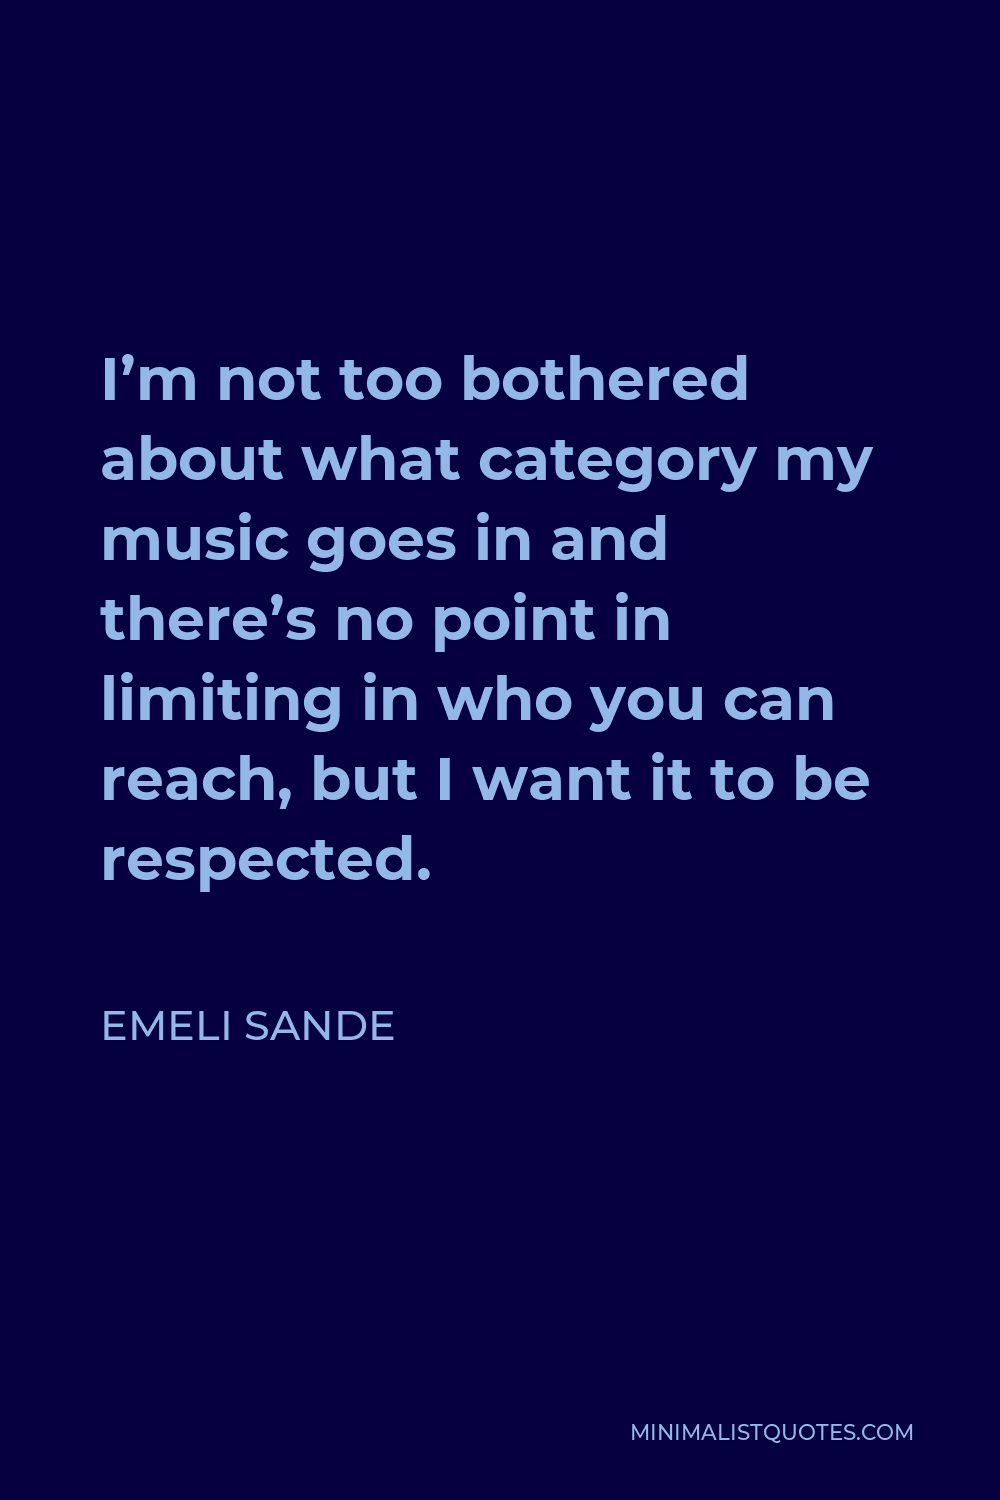 Emeli Sande Quote - I’m not too bothered about what category my music goes in and there’s no point in limiting in who you can reach, but I want it to be respected.